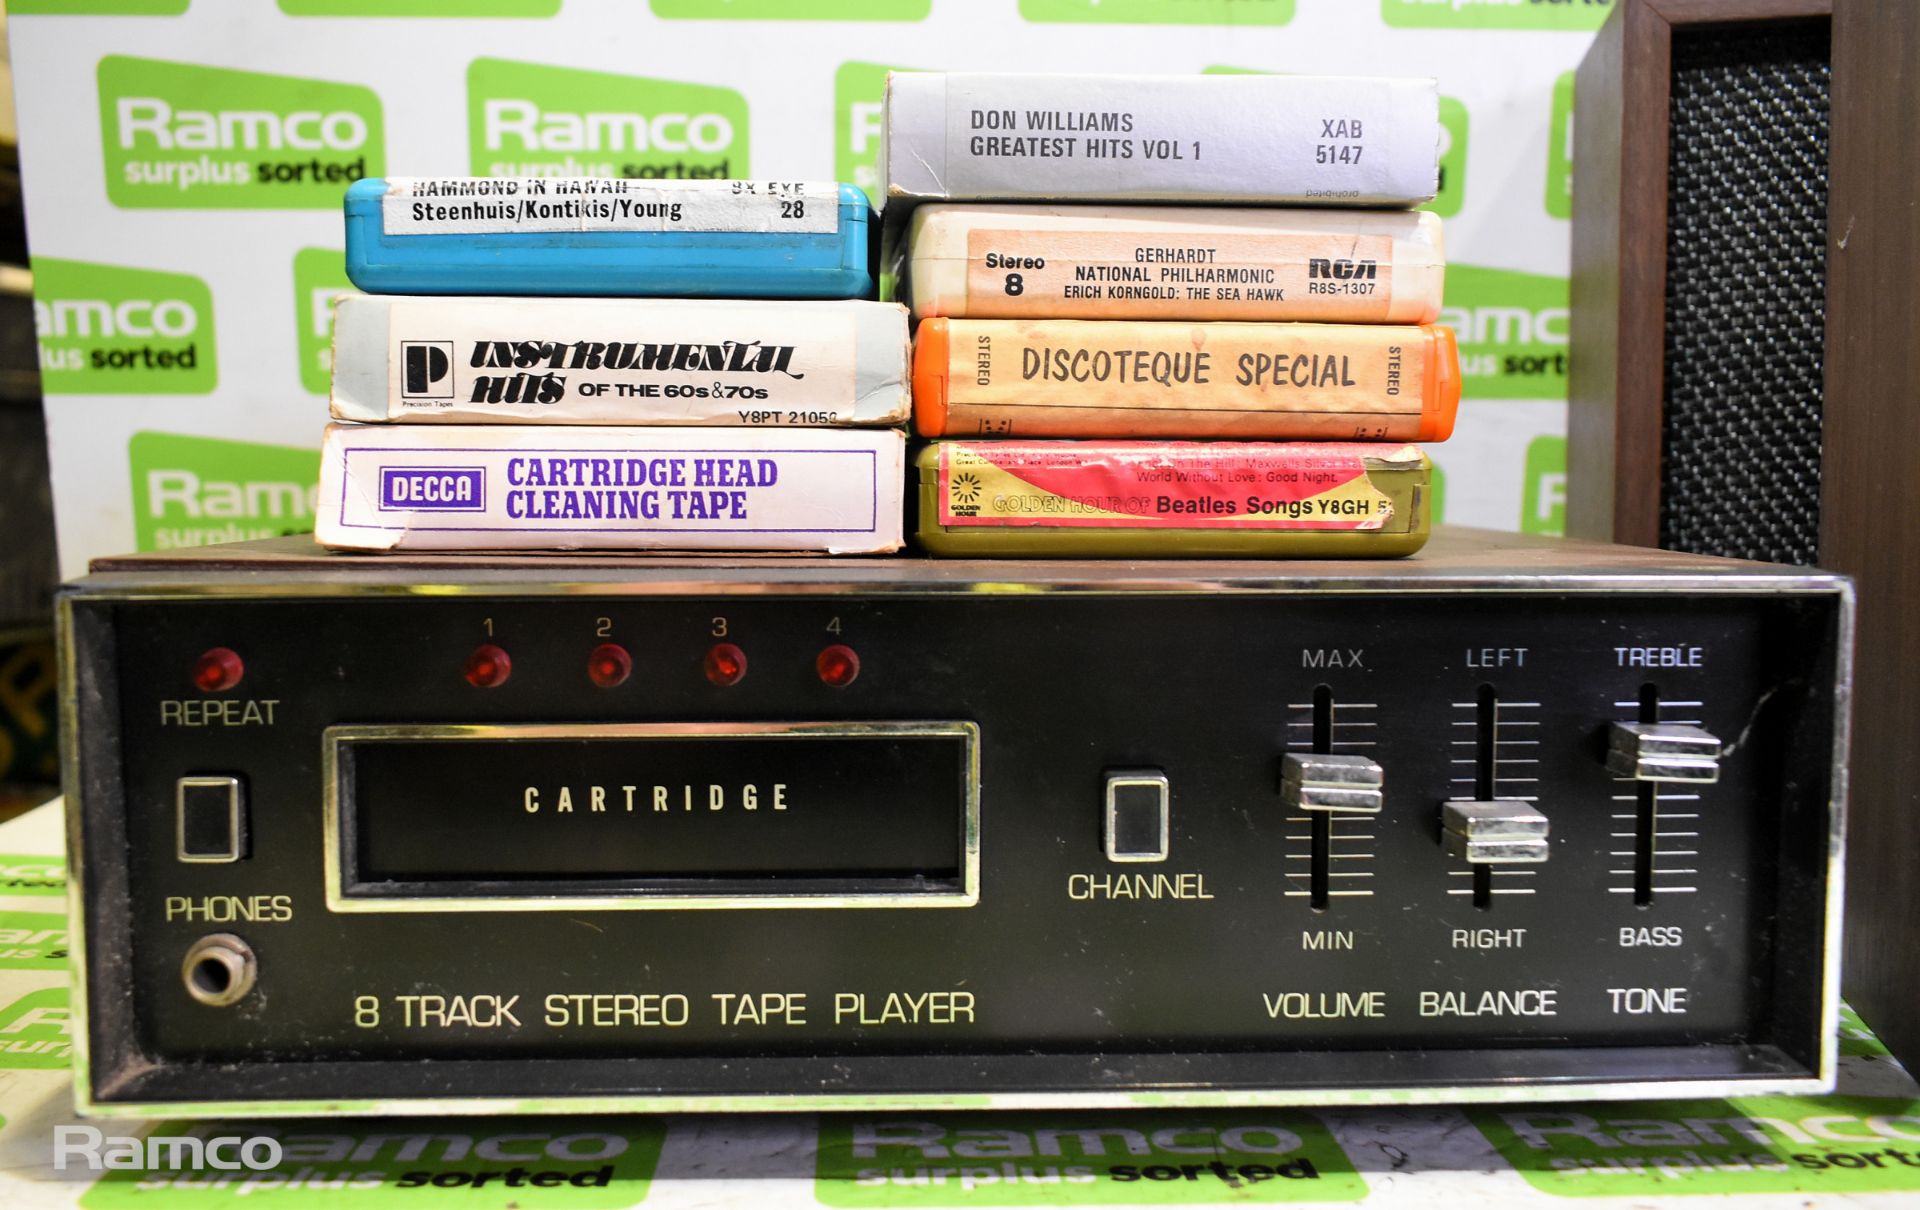 Model-I-803 8 track stereo tape player - Image 2 of 4